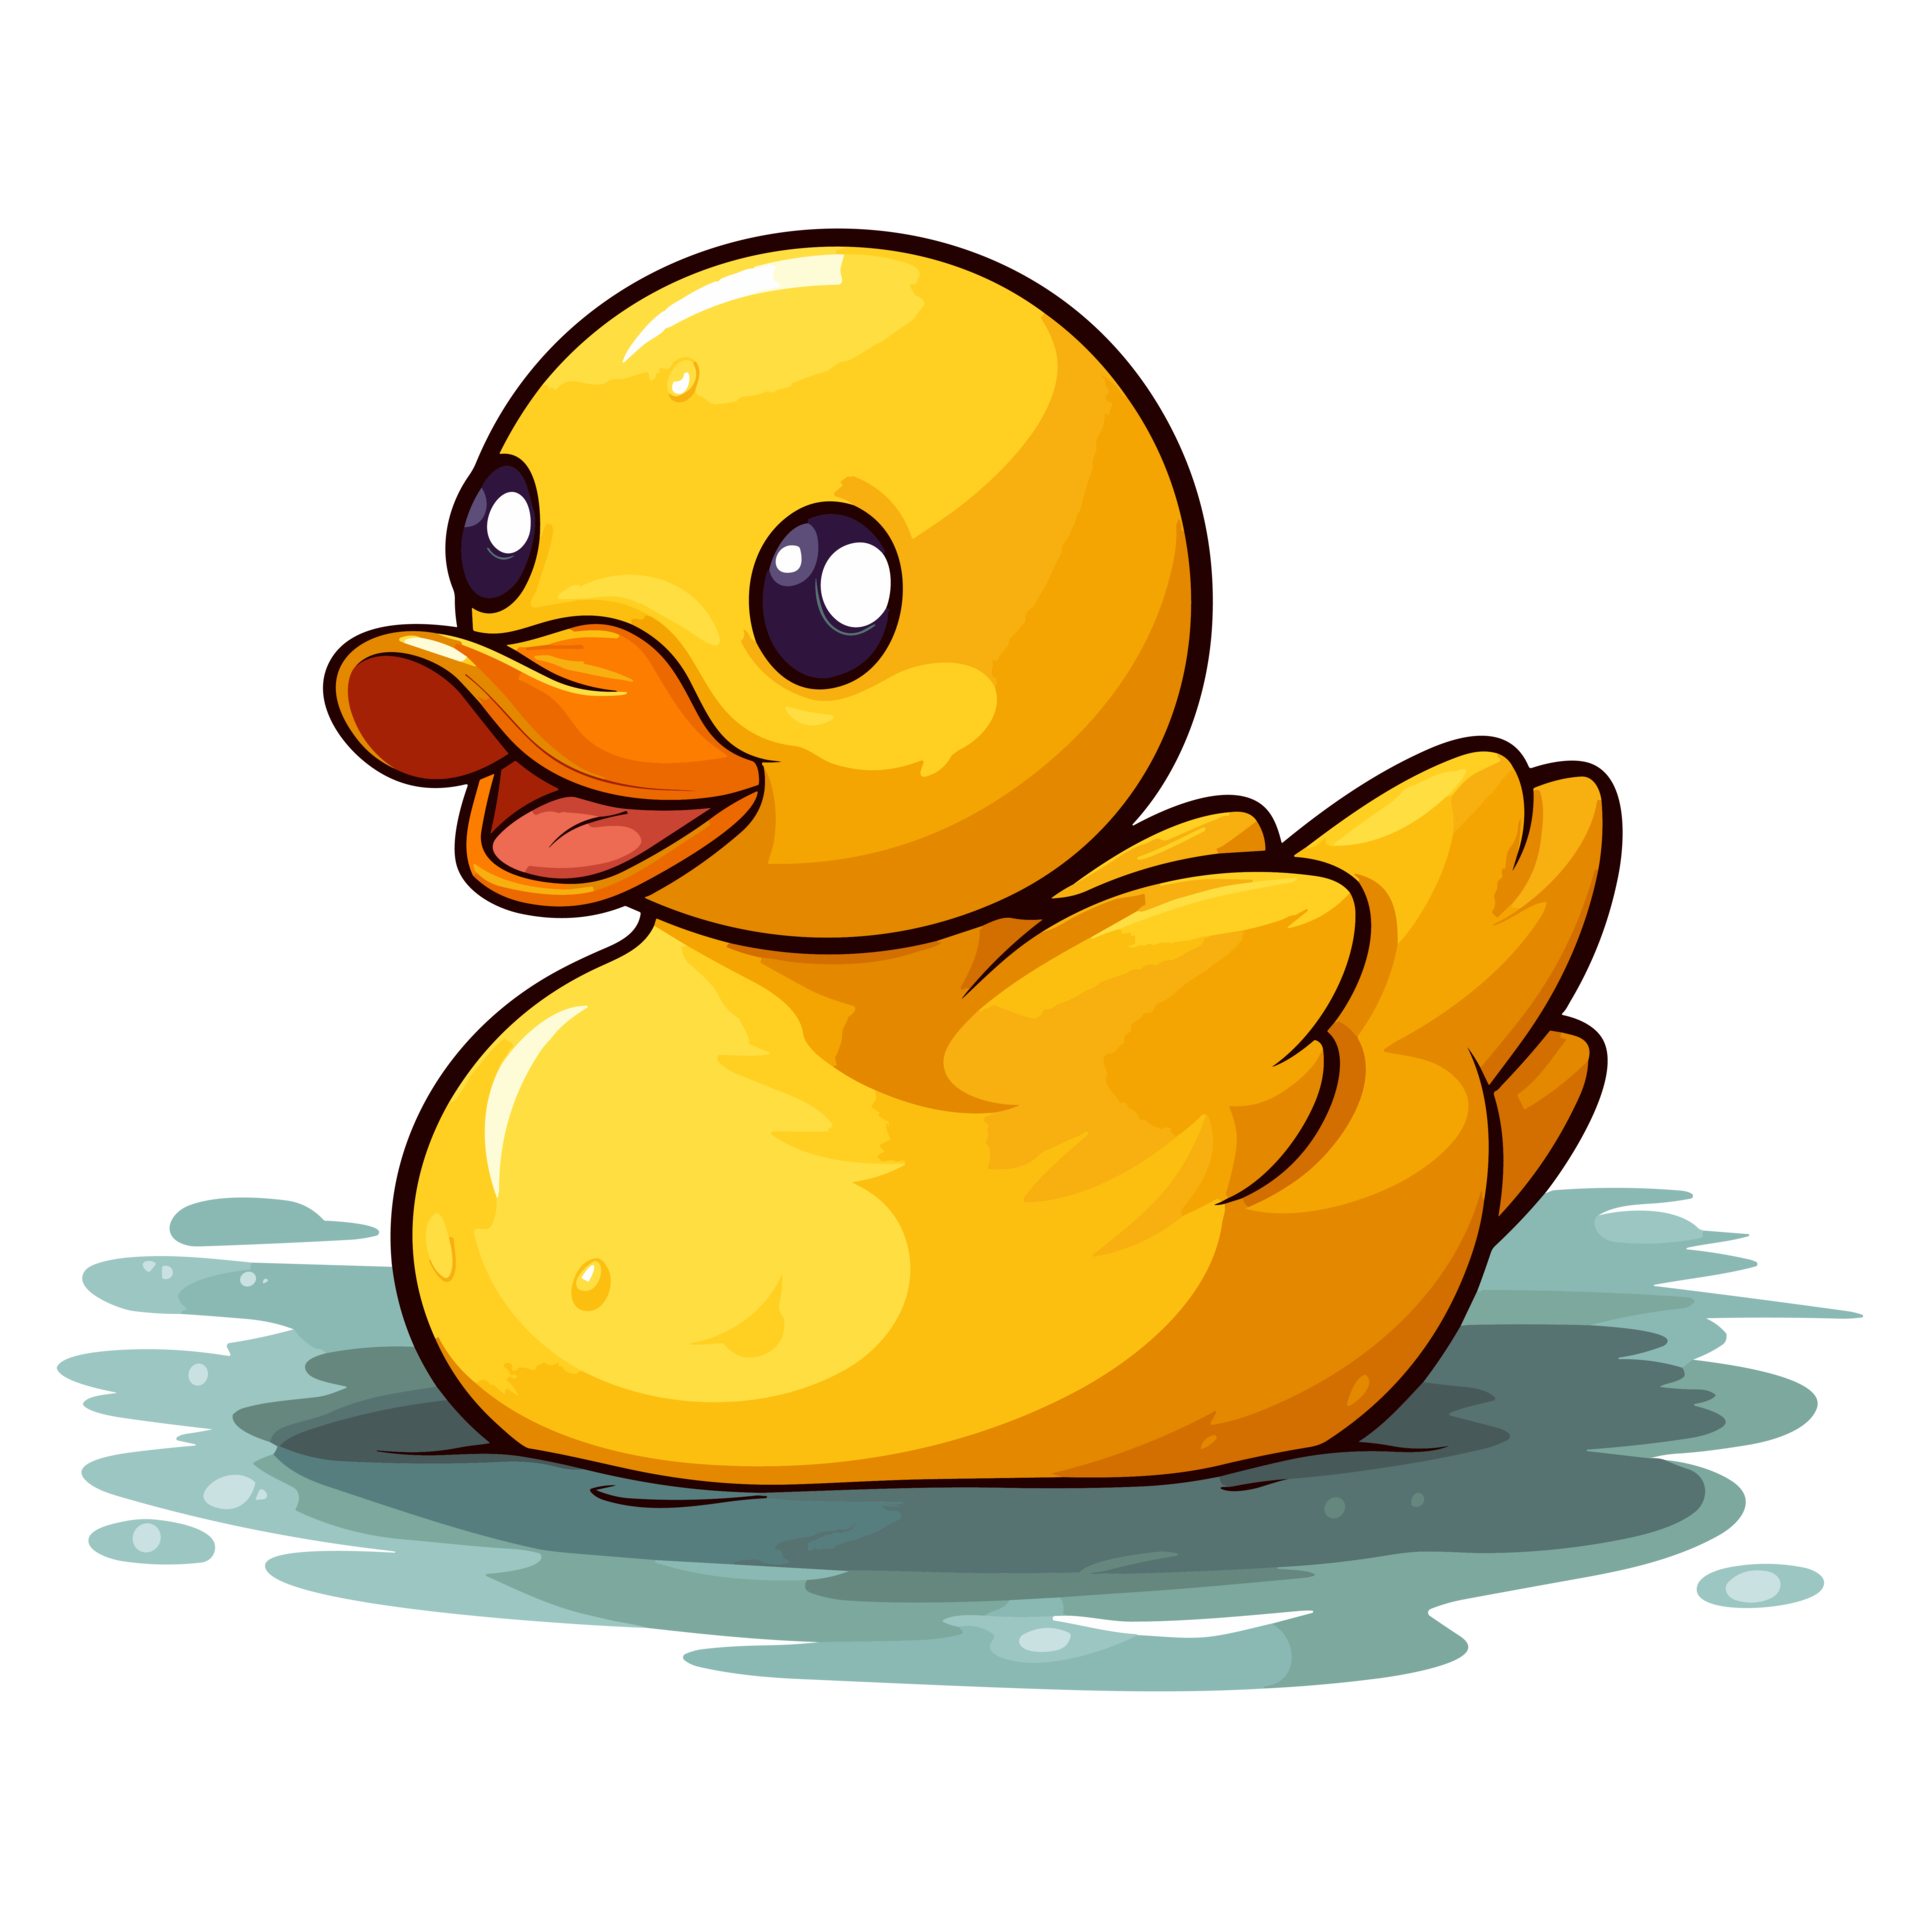 Yellow duck is bathing in a puddle, rubber bath duck illustration ...